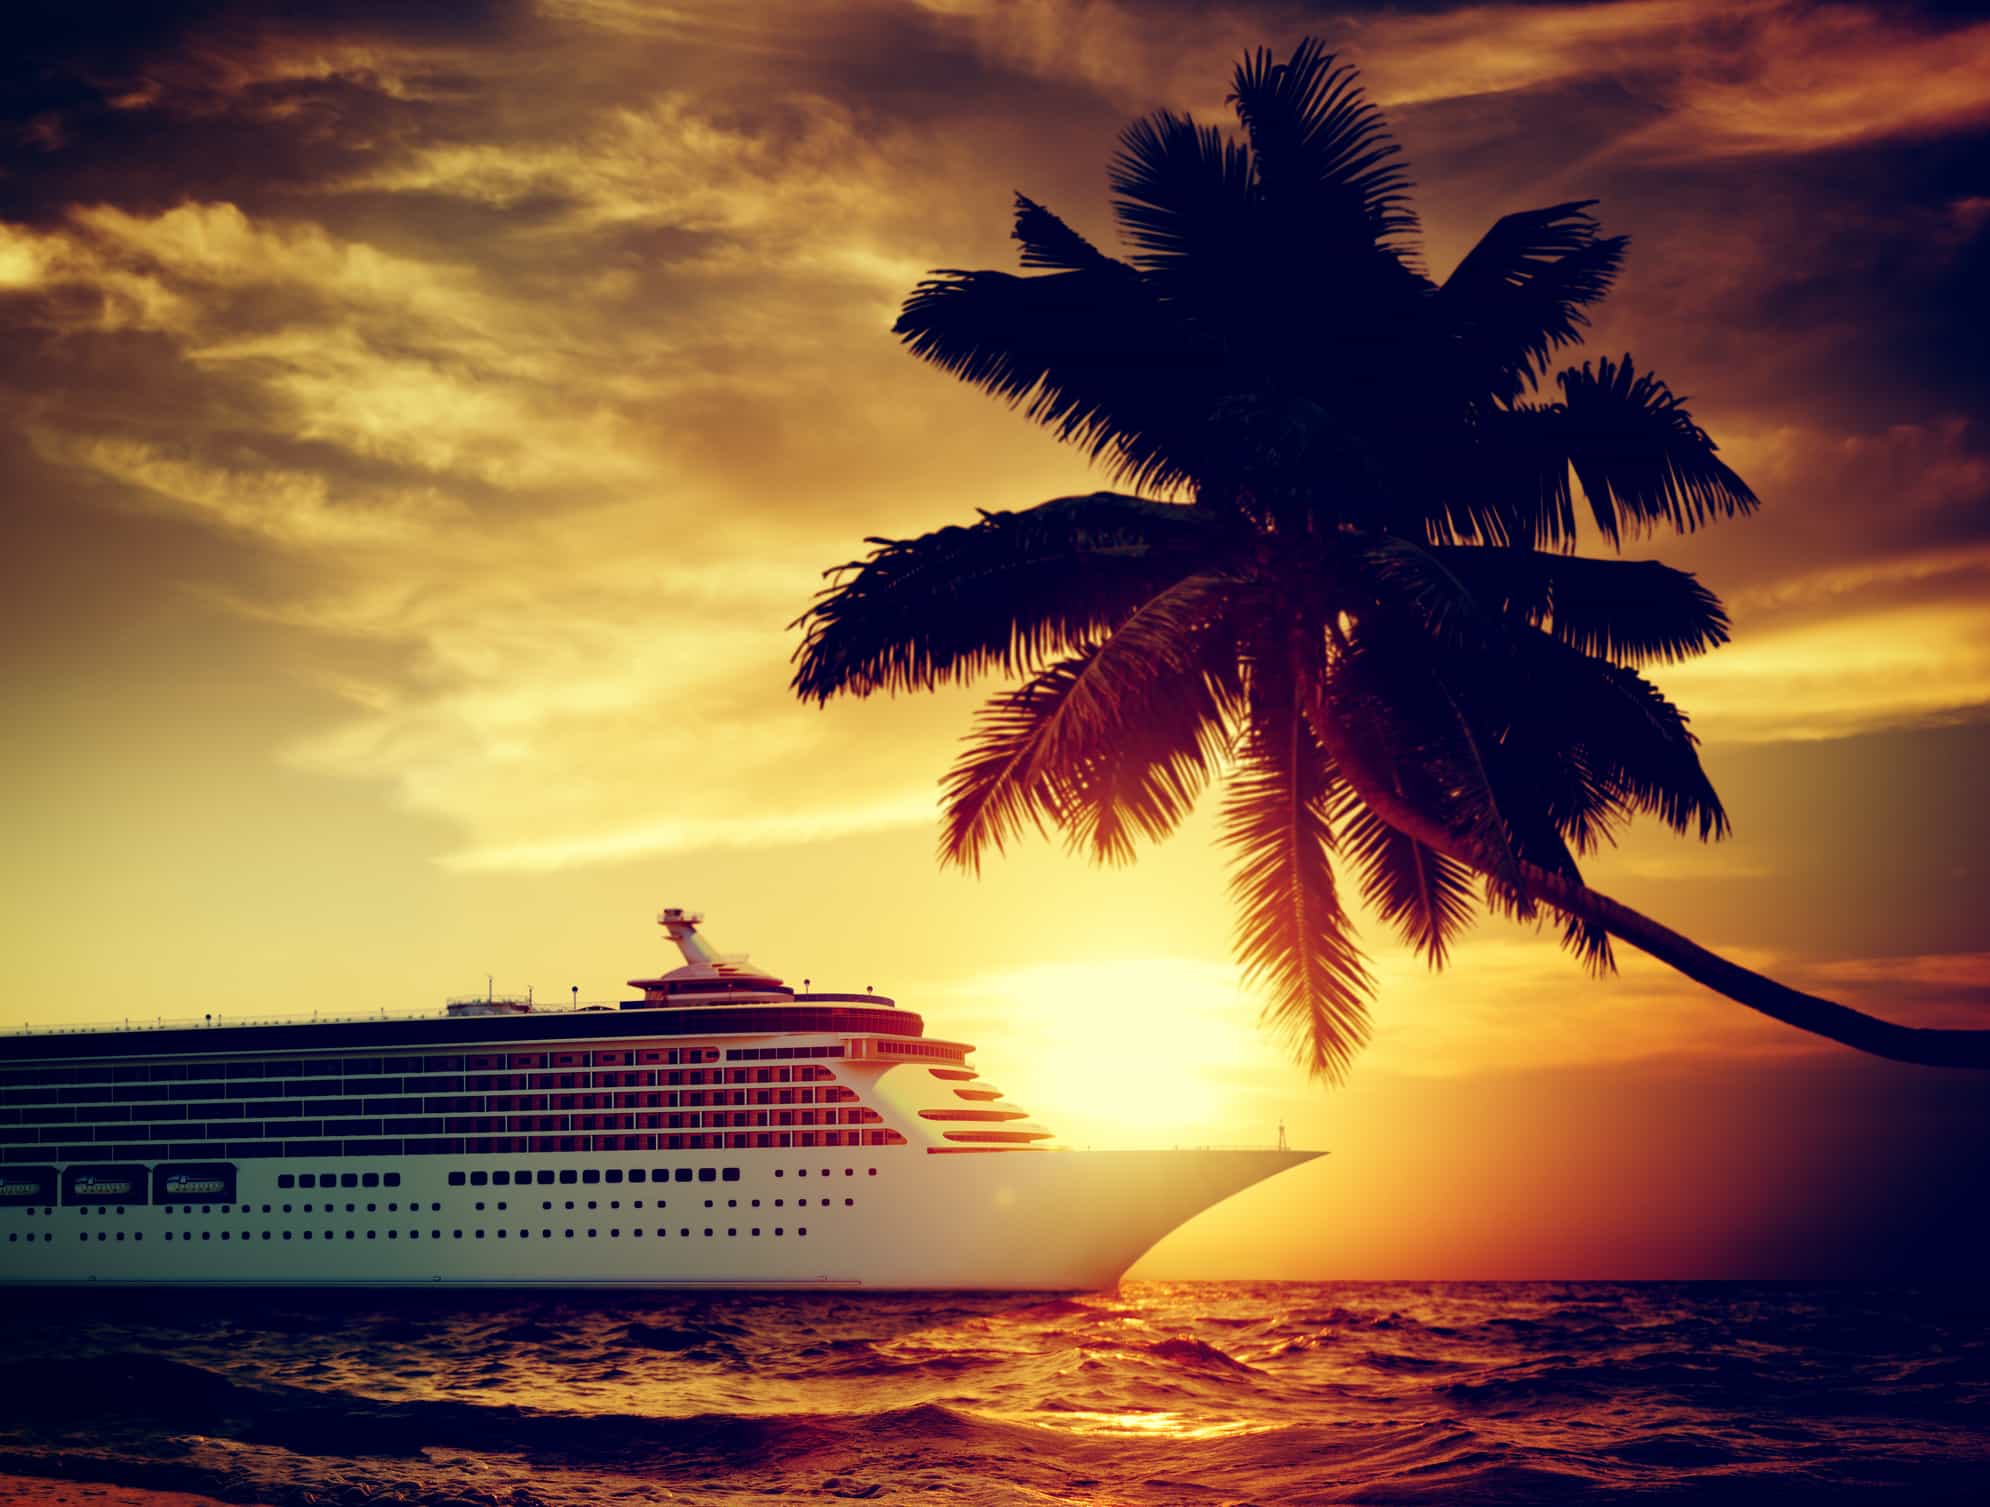 All aboard – The popularity of cruising continues to rise